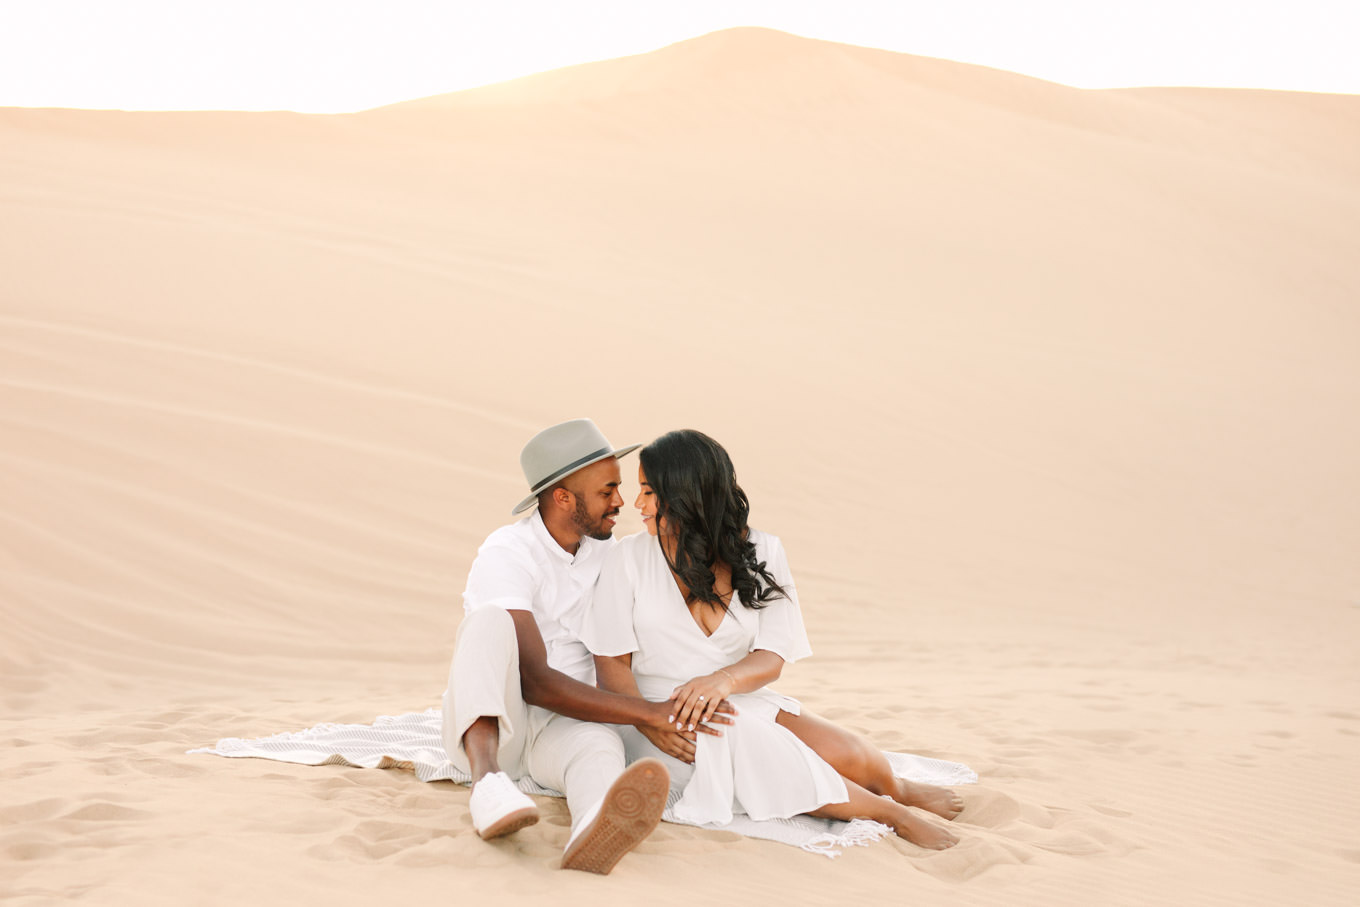 Glamis Sand Dunes engagement session | Engagement, elopement, and wedding photography roundup of Mary Costa’s favorite images from 2020 | Colorful and elevated photography for fun-loving couples in Southern California | #2020wedding #elopement #weddingphoto #weddingphotography #microwedding   Source: Mary Costa Photography | Los Angeles